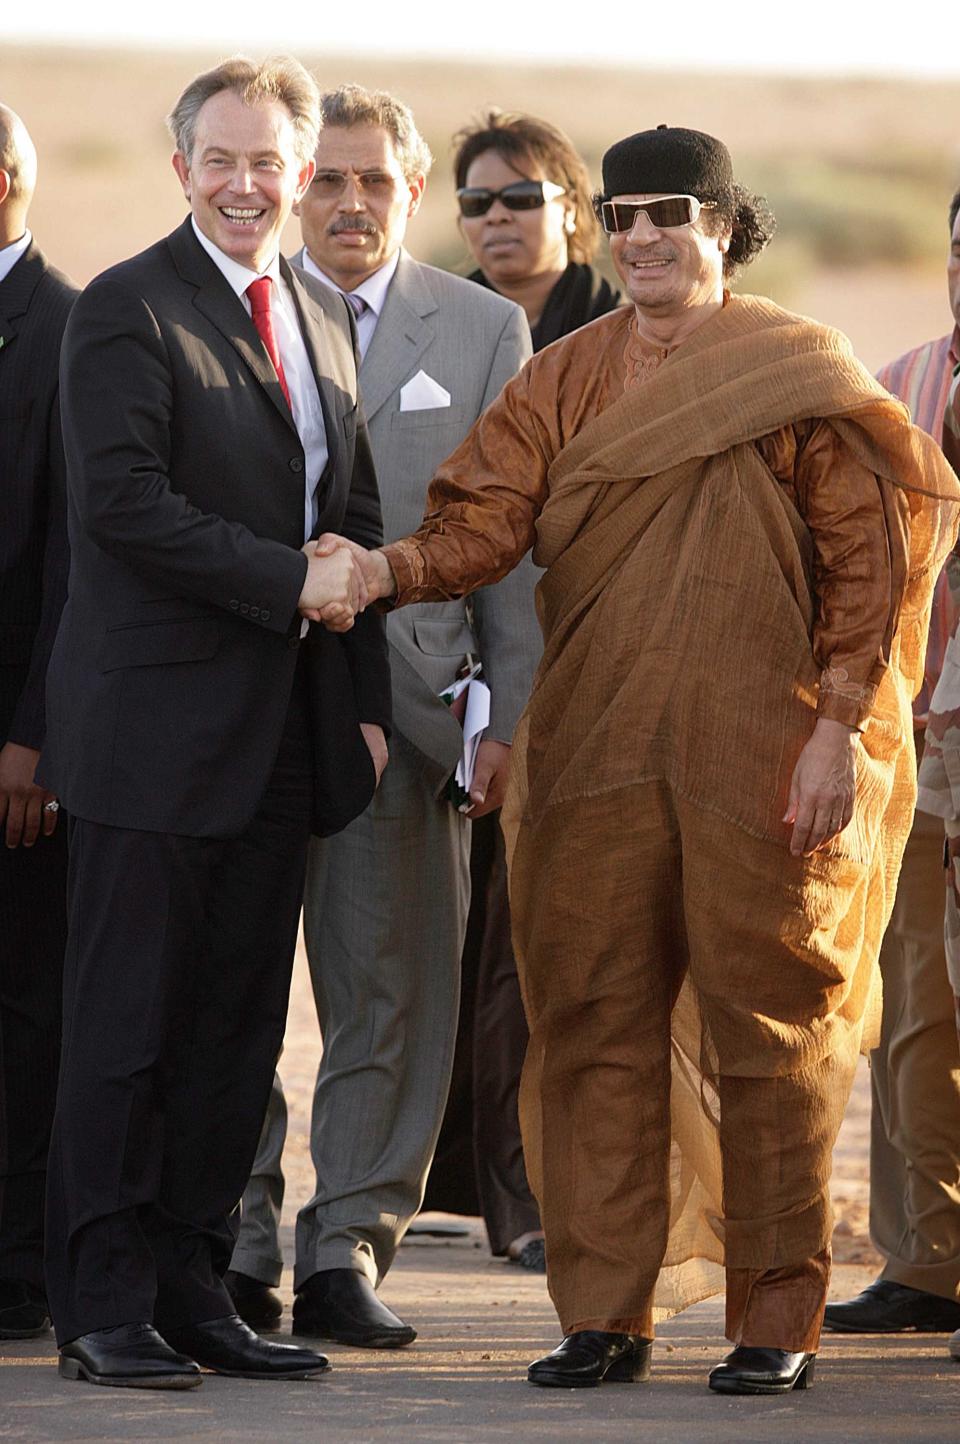 This is one of the fashionista's few fashion blunders in the noughties. With the passing of time, his figure isn't what it was, and these draped trousers are unforgiving on the thighs. The golden sunglasses do not do enough to distract from the problems around the waistline.     Gaddafi meets Blair in 2007 in Sirte, Libya. 